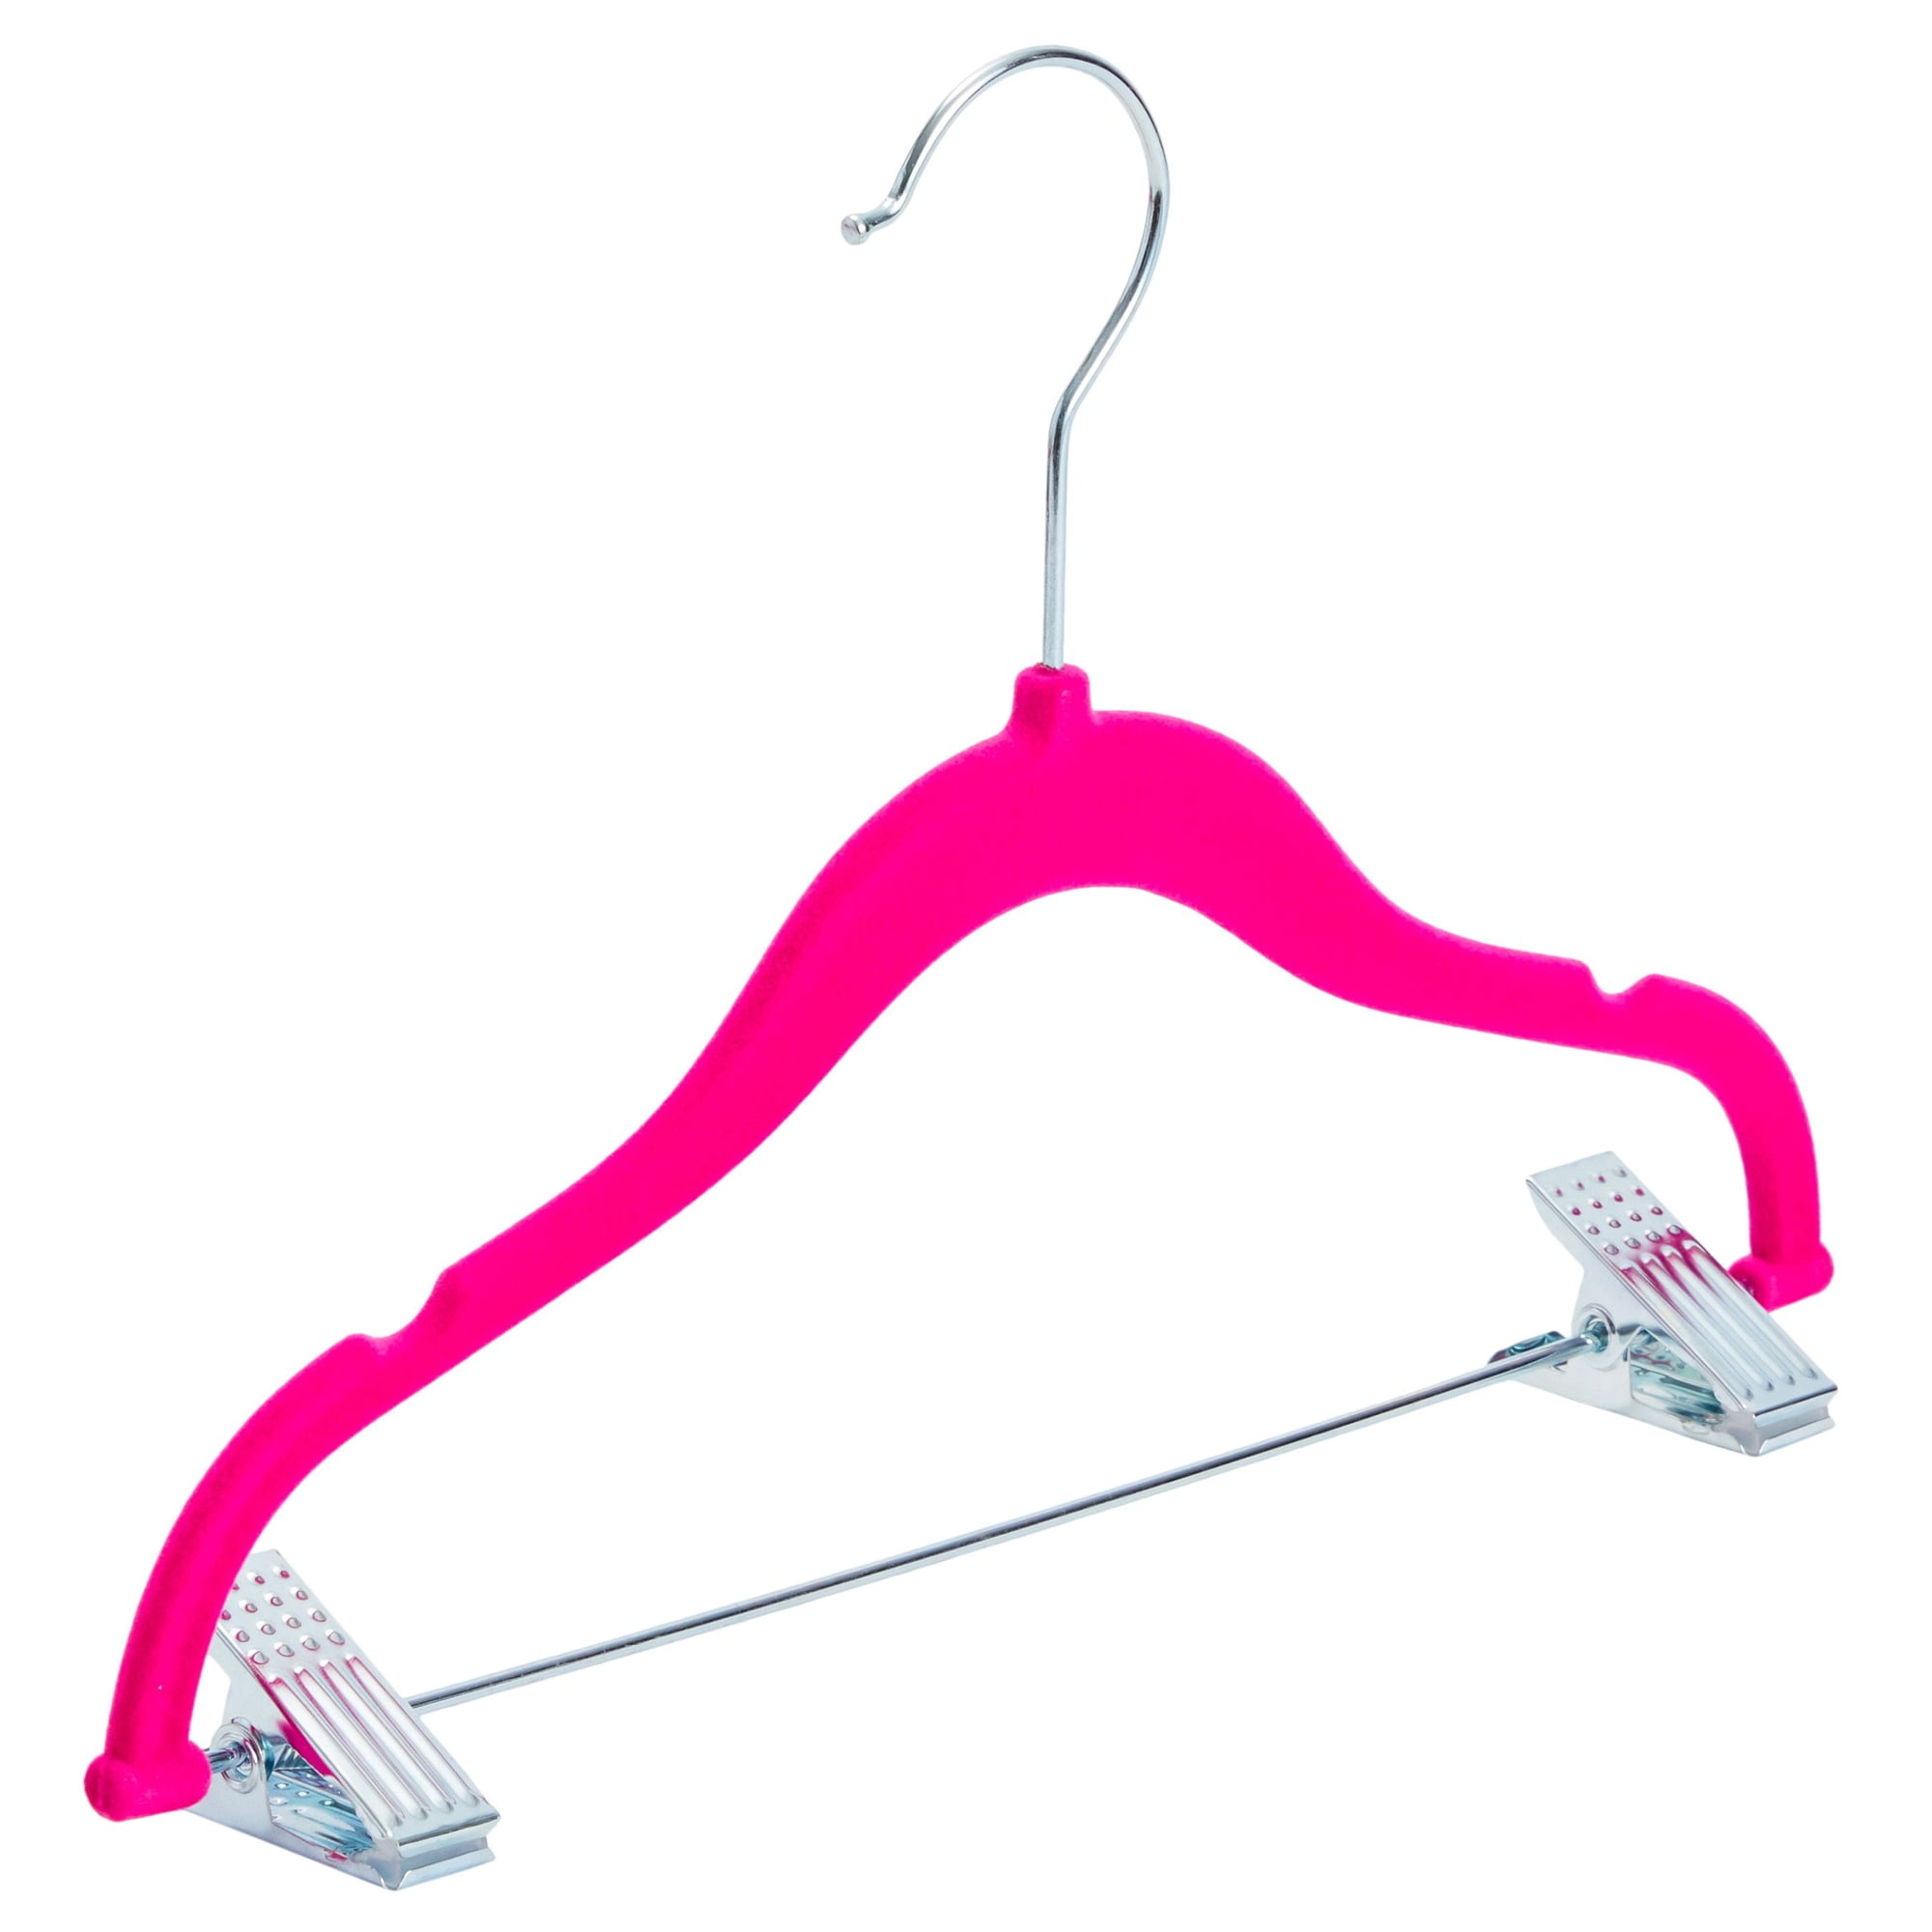 Petite Size Pink Non-Slip Hangers – Only Hangers Inc.